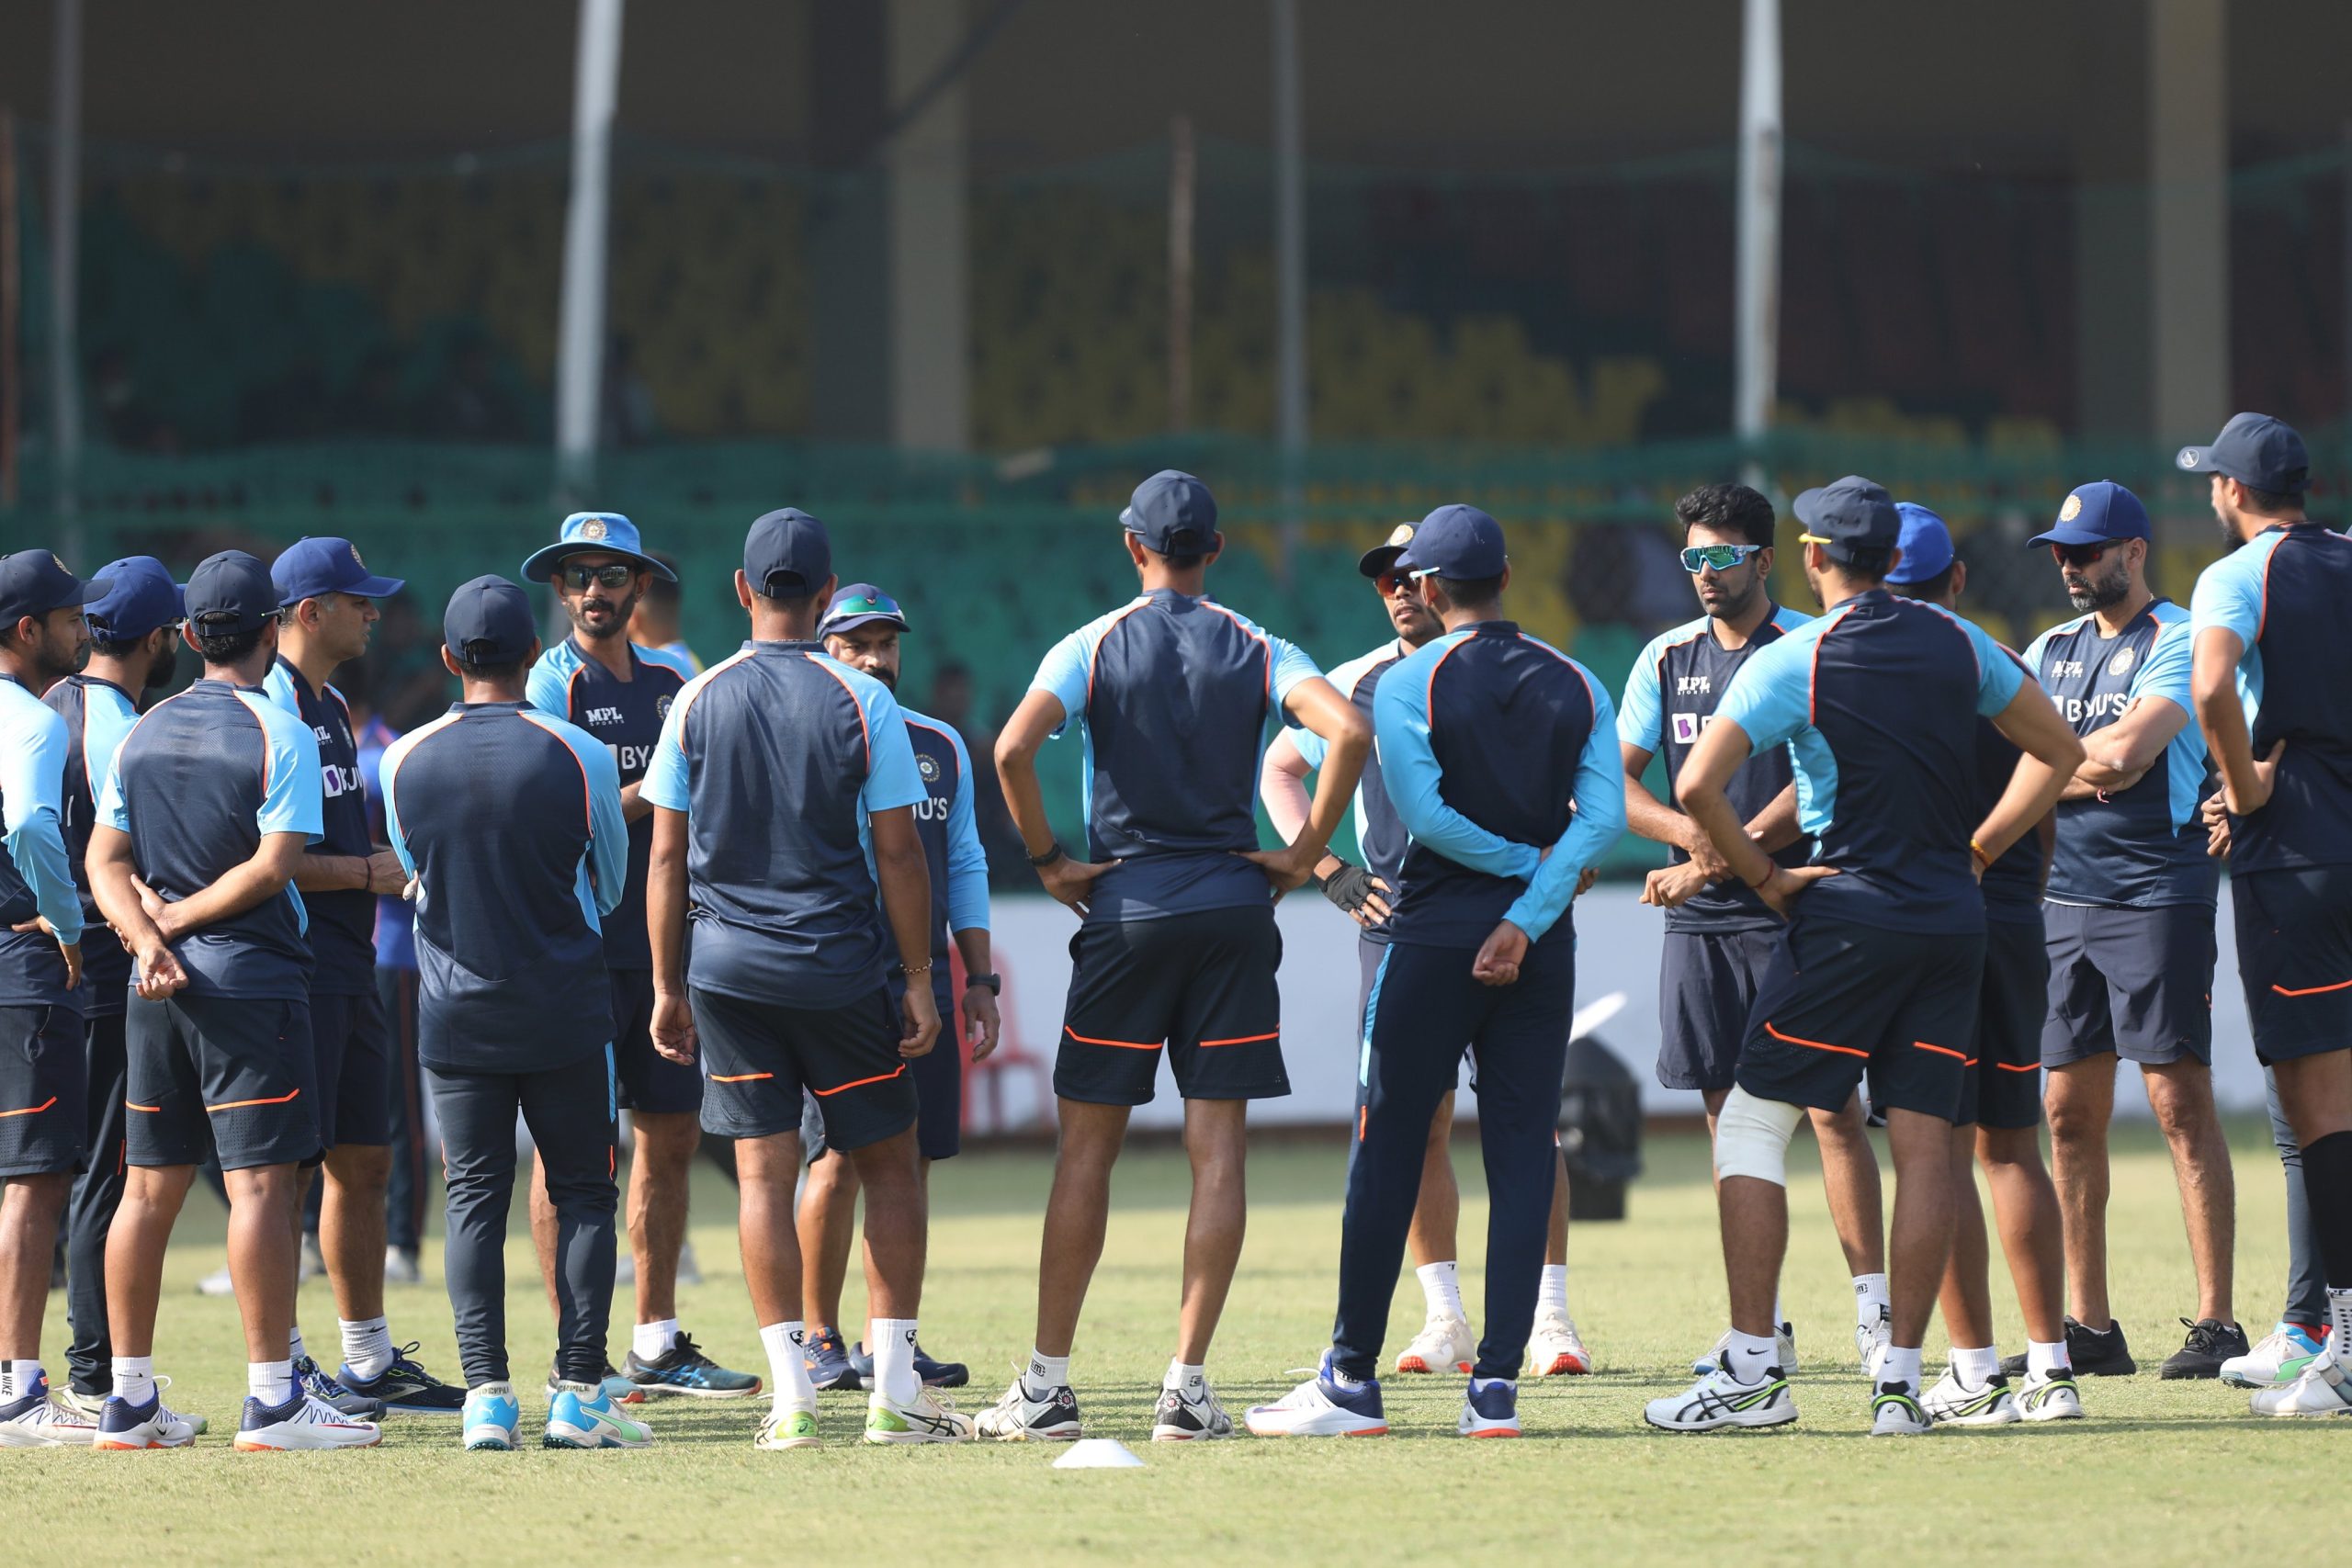 Team India complete training session at Kanpur ahead of first Test